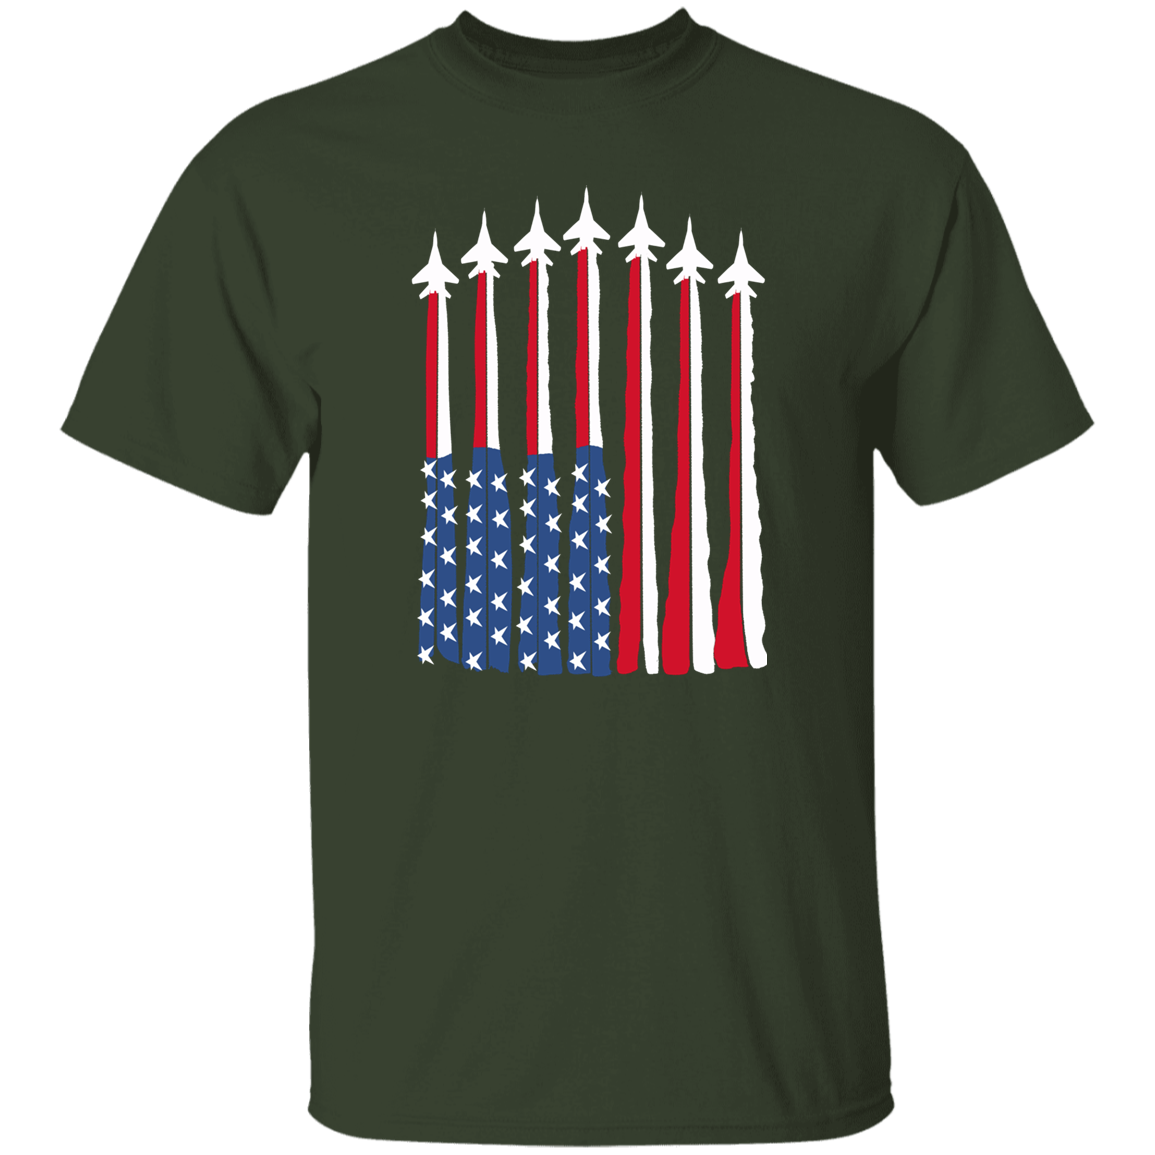 Jets Flying T-Shirt